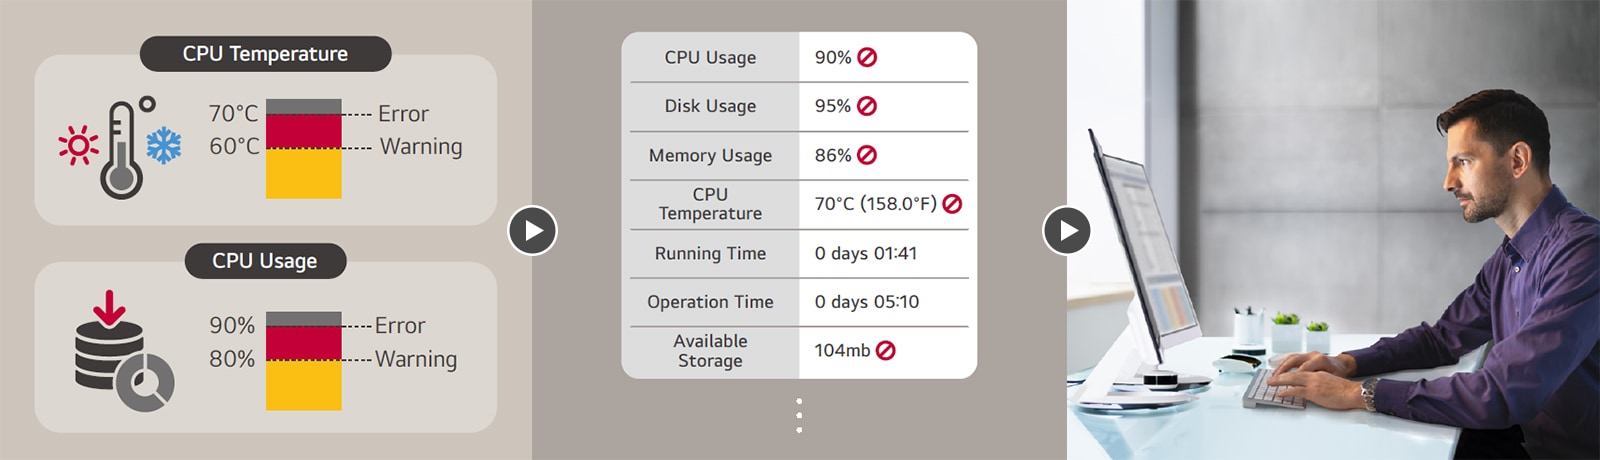 The user can set a threshold for receiving an warning/error signal for several categories: CPU temperature, CPU usage, etc. The current status of the issue is easily indicated in categories, enabling for quick real-time responses. Issues can be managed remotely with an LG ConnectedCare DMS solution.